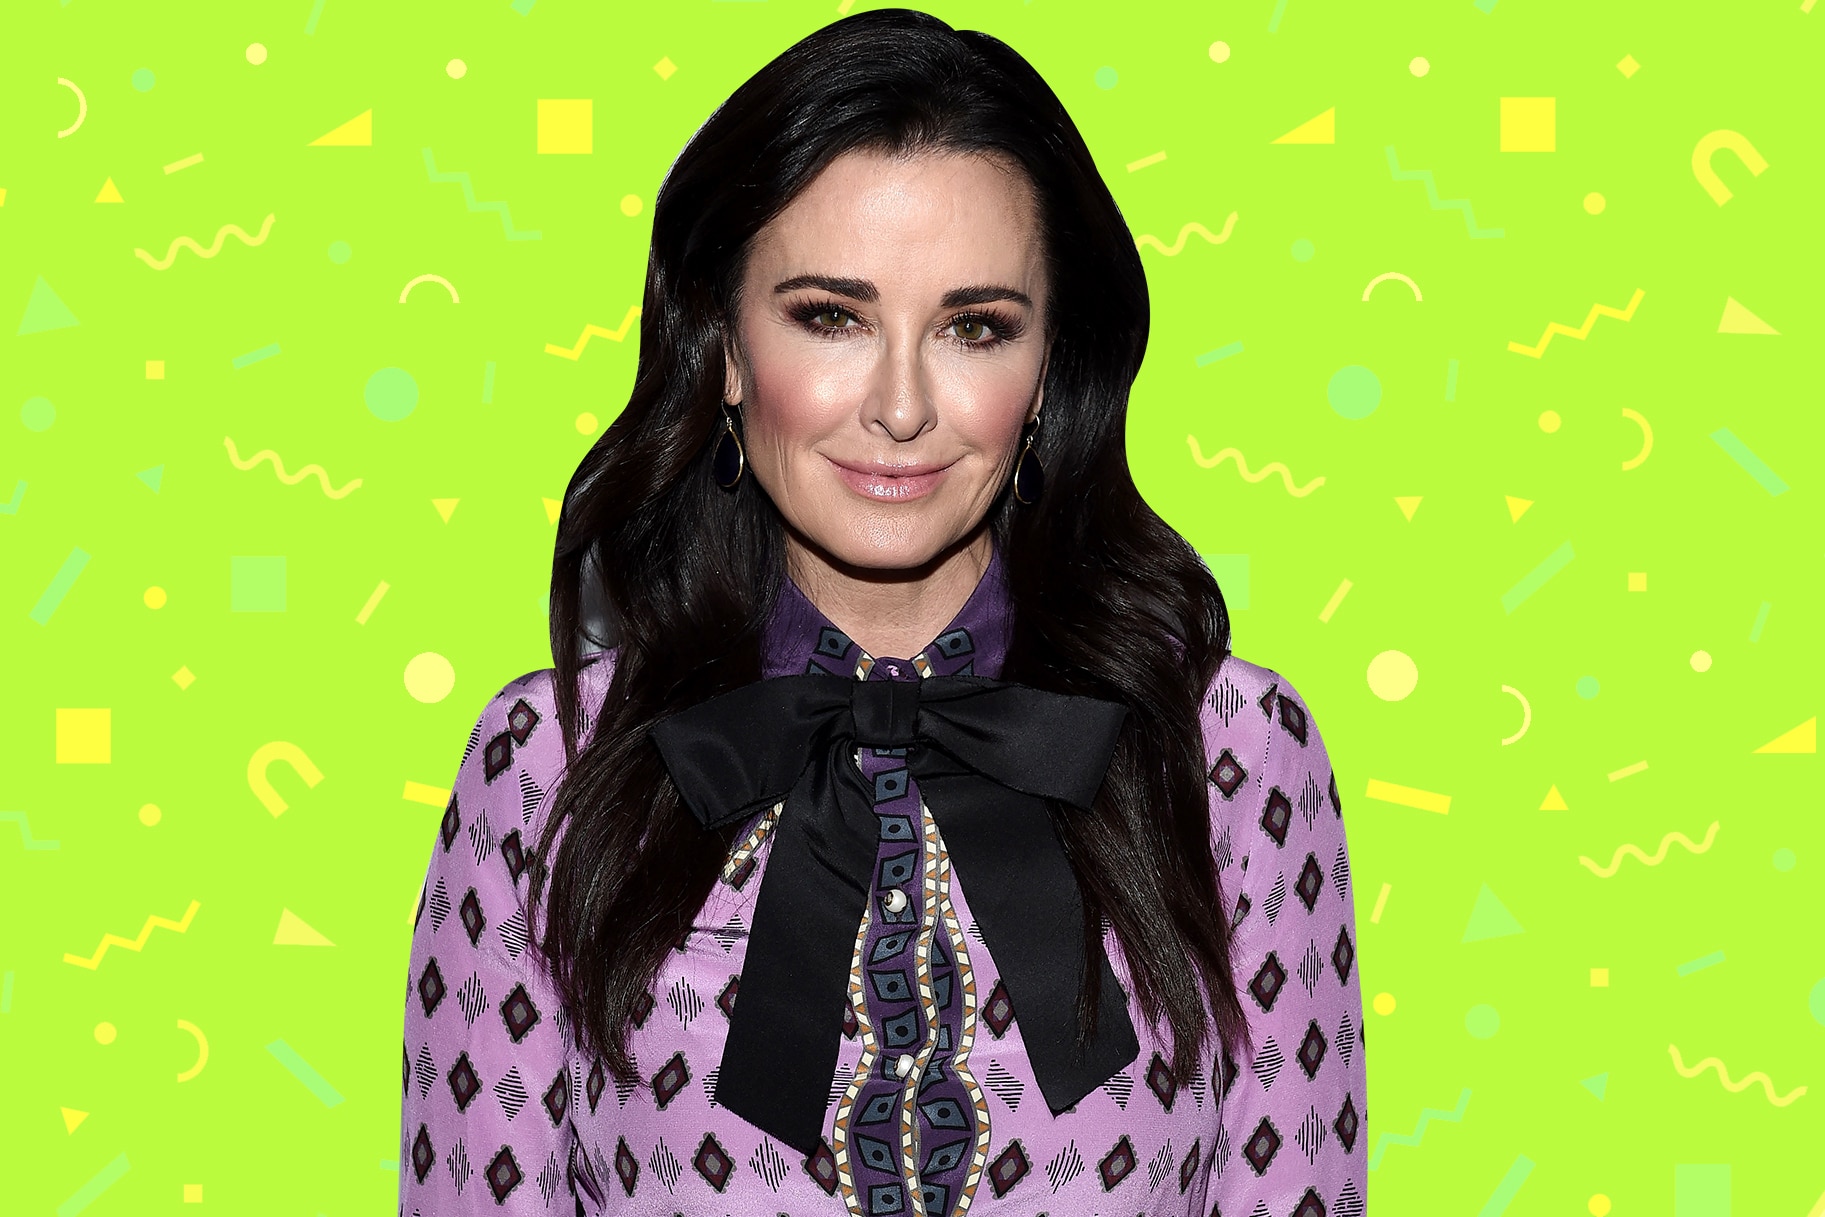 Kyle Richards The Real Housewives of Beverly Hills 8.01 Stronger